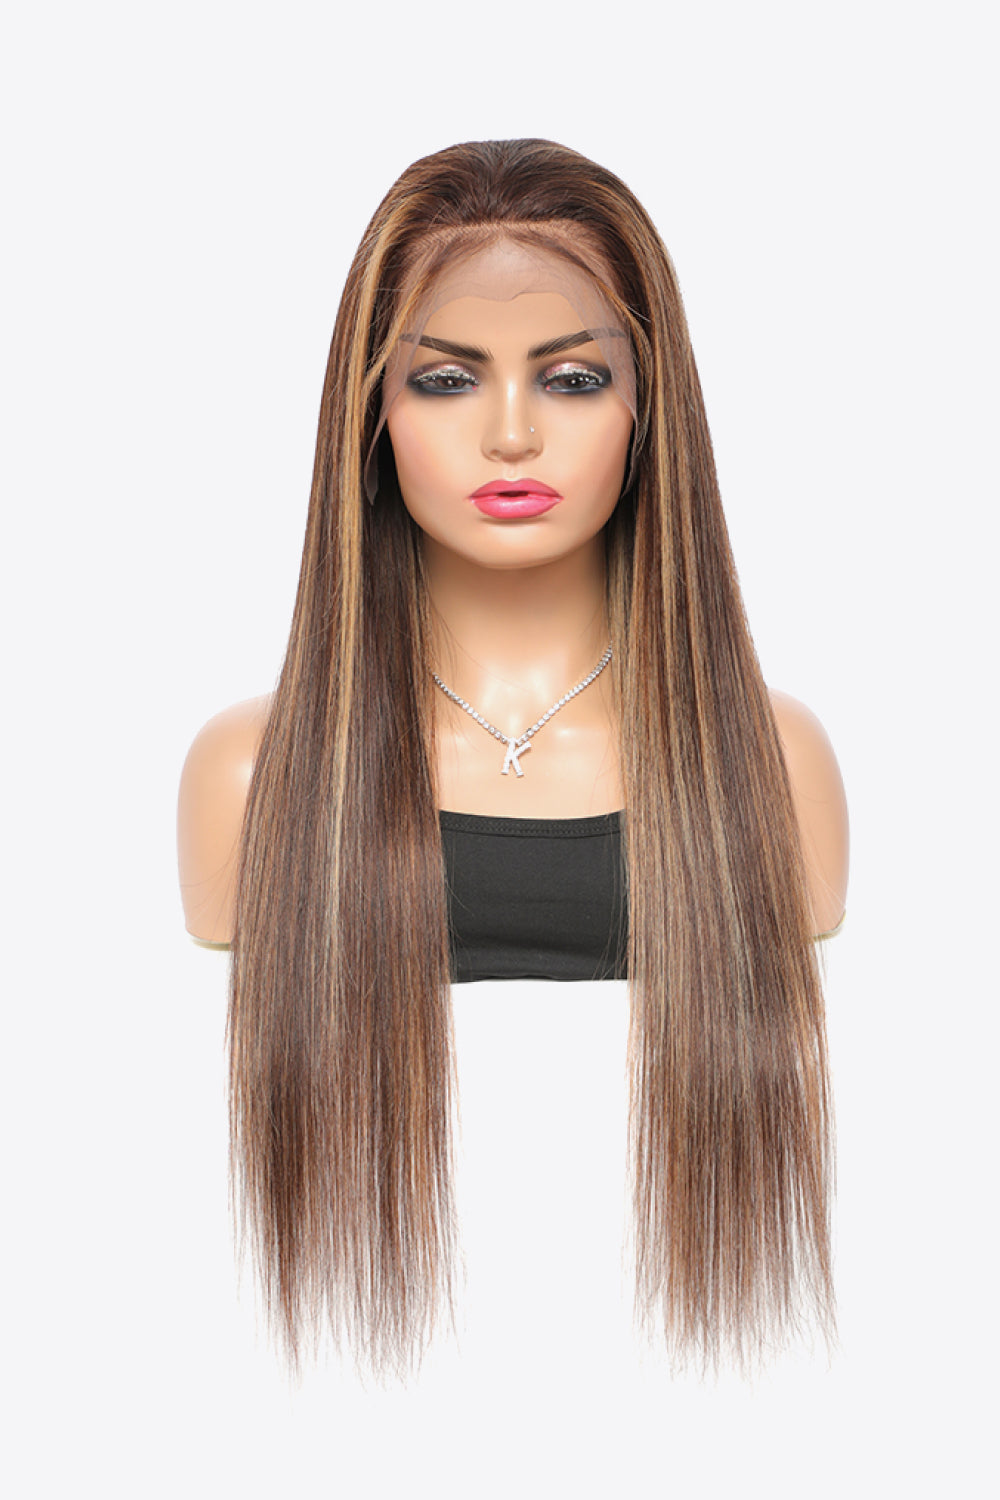 18" 160g  Highlight Ombre #P4/27 13x4 Lace Front Wigs Human Virgin Hair 150% Density - AllIn Computer